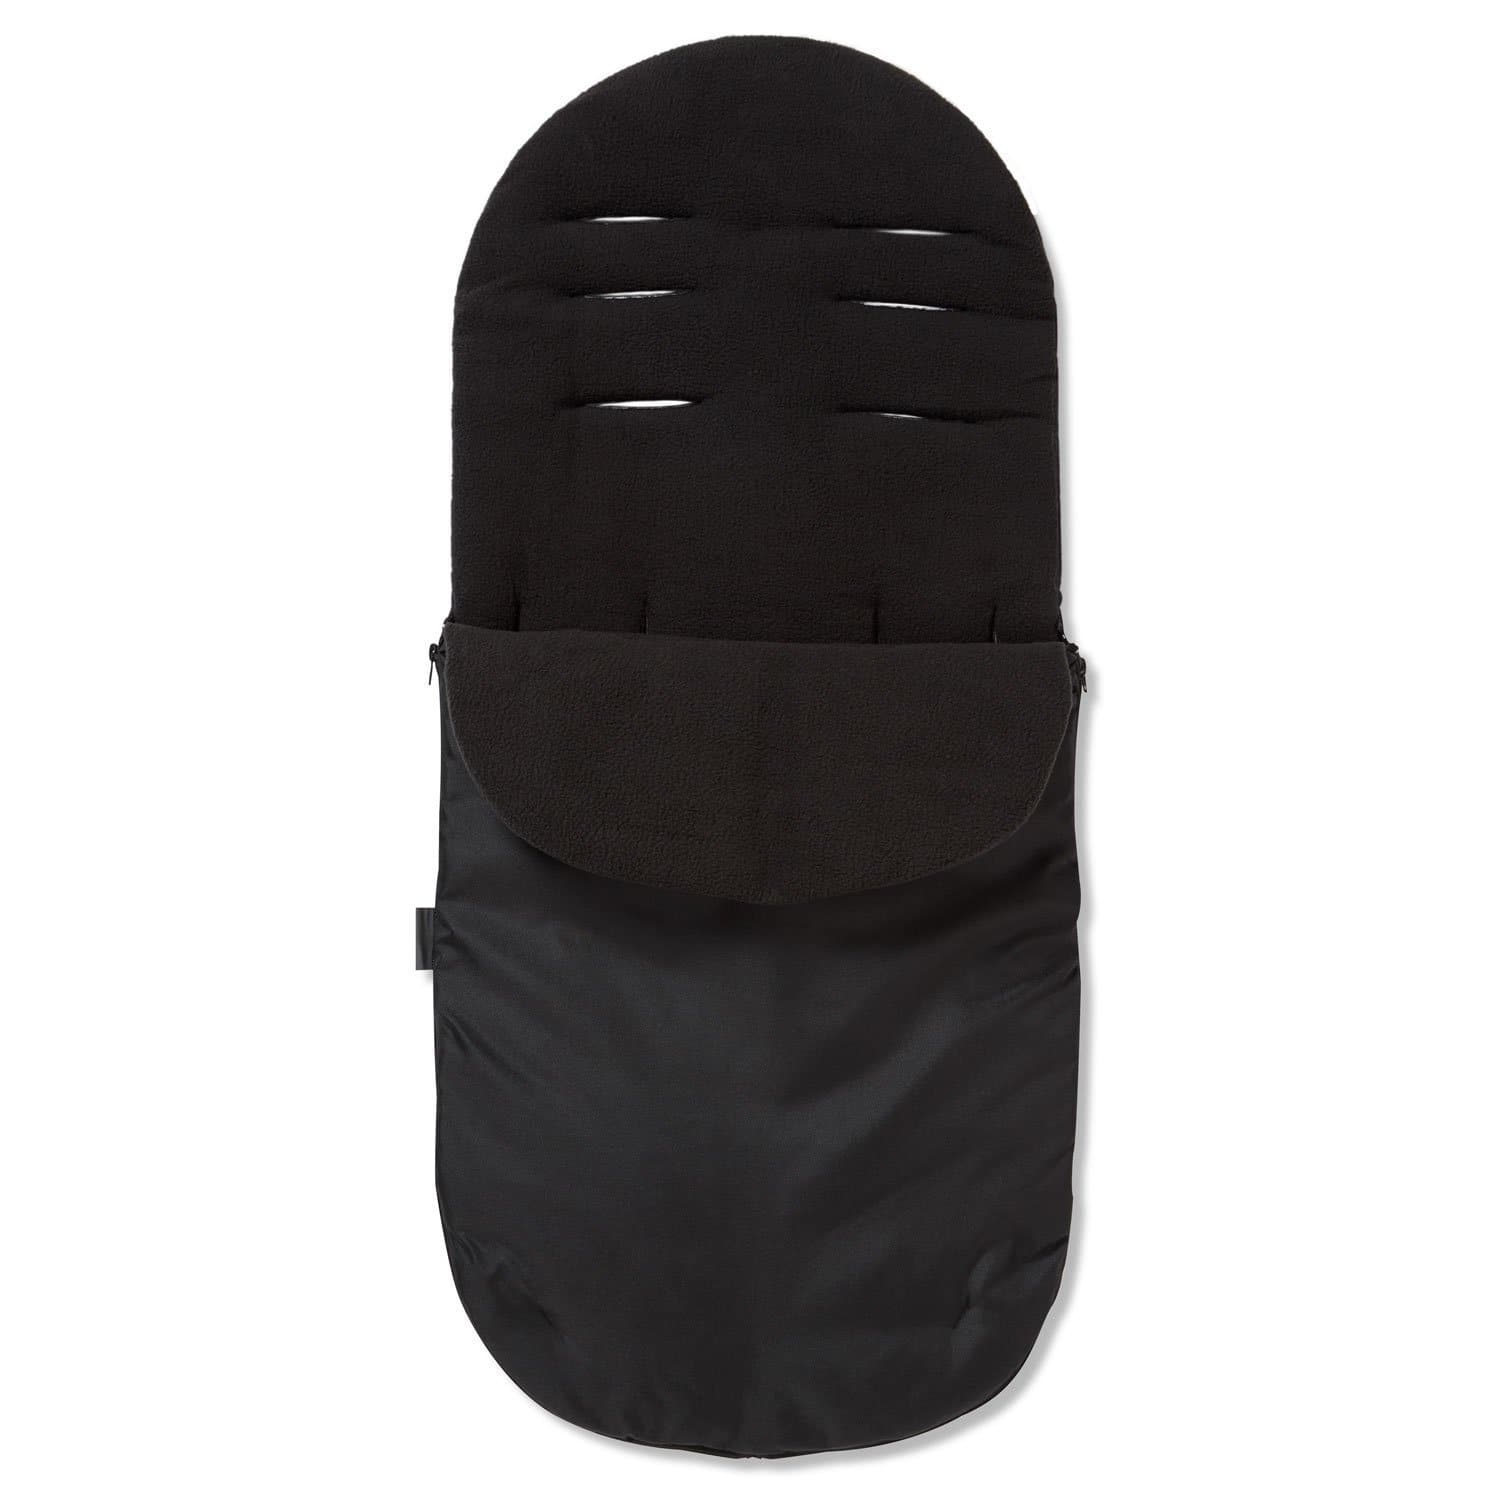 Footmuff / Cosy Toes Compatible with Uppababy - Black / Fits All Models | For Your Little One